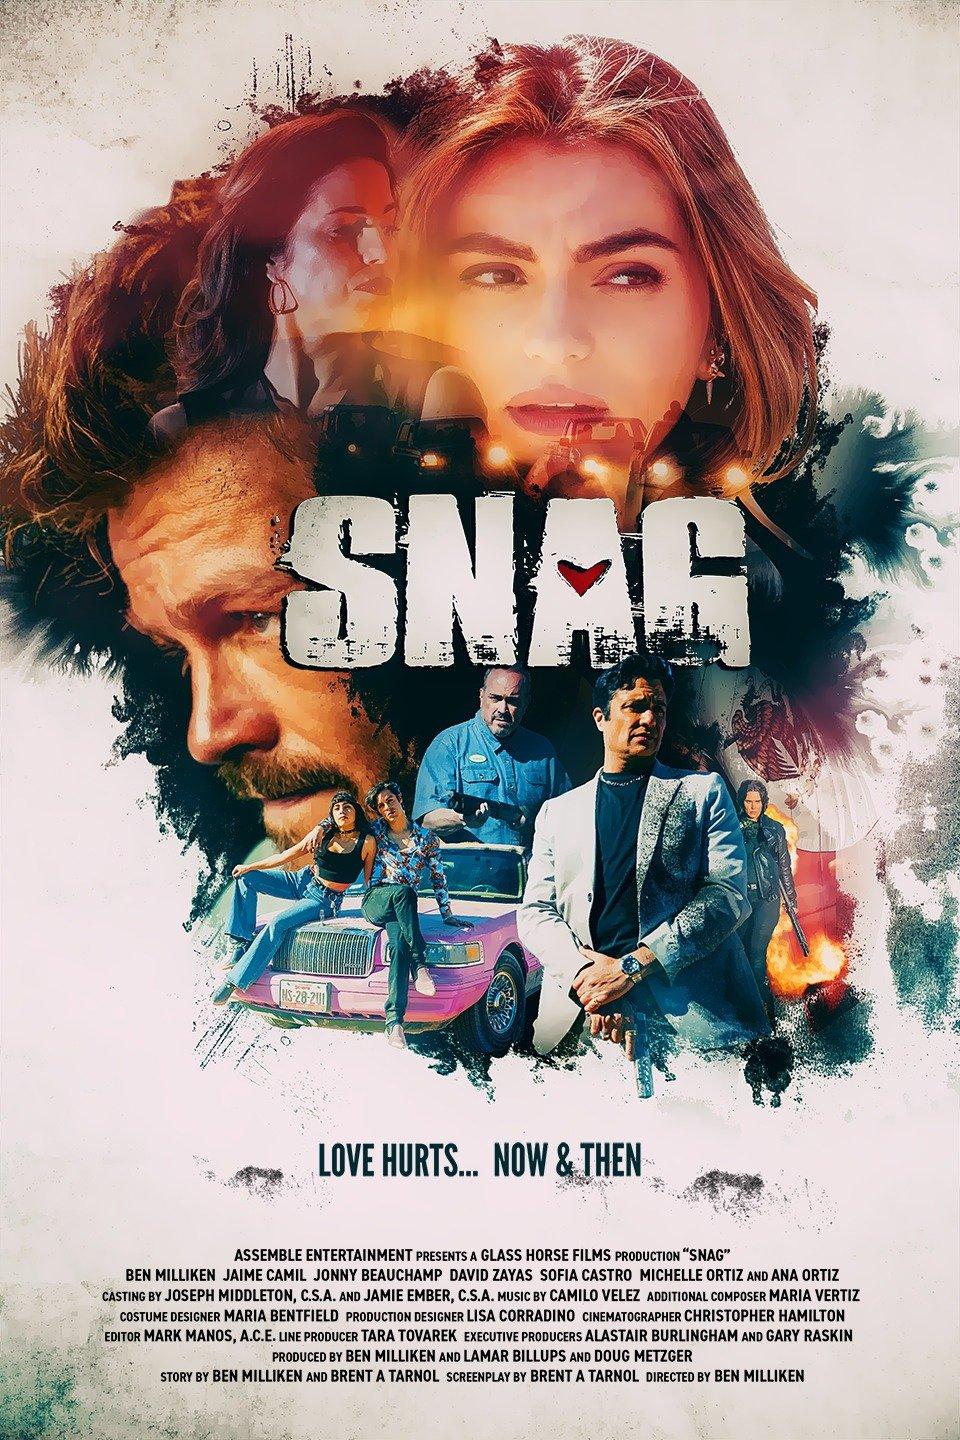 Movie poster for "Snag."